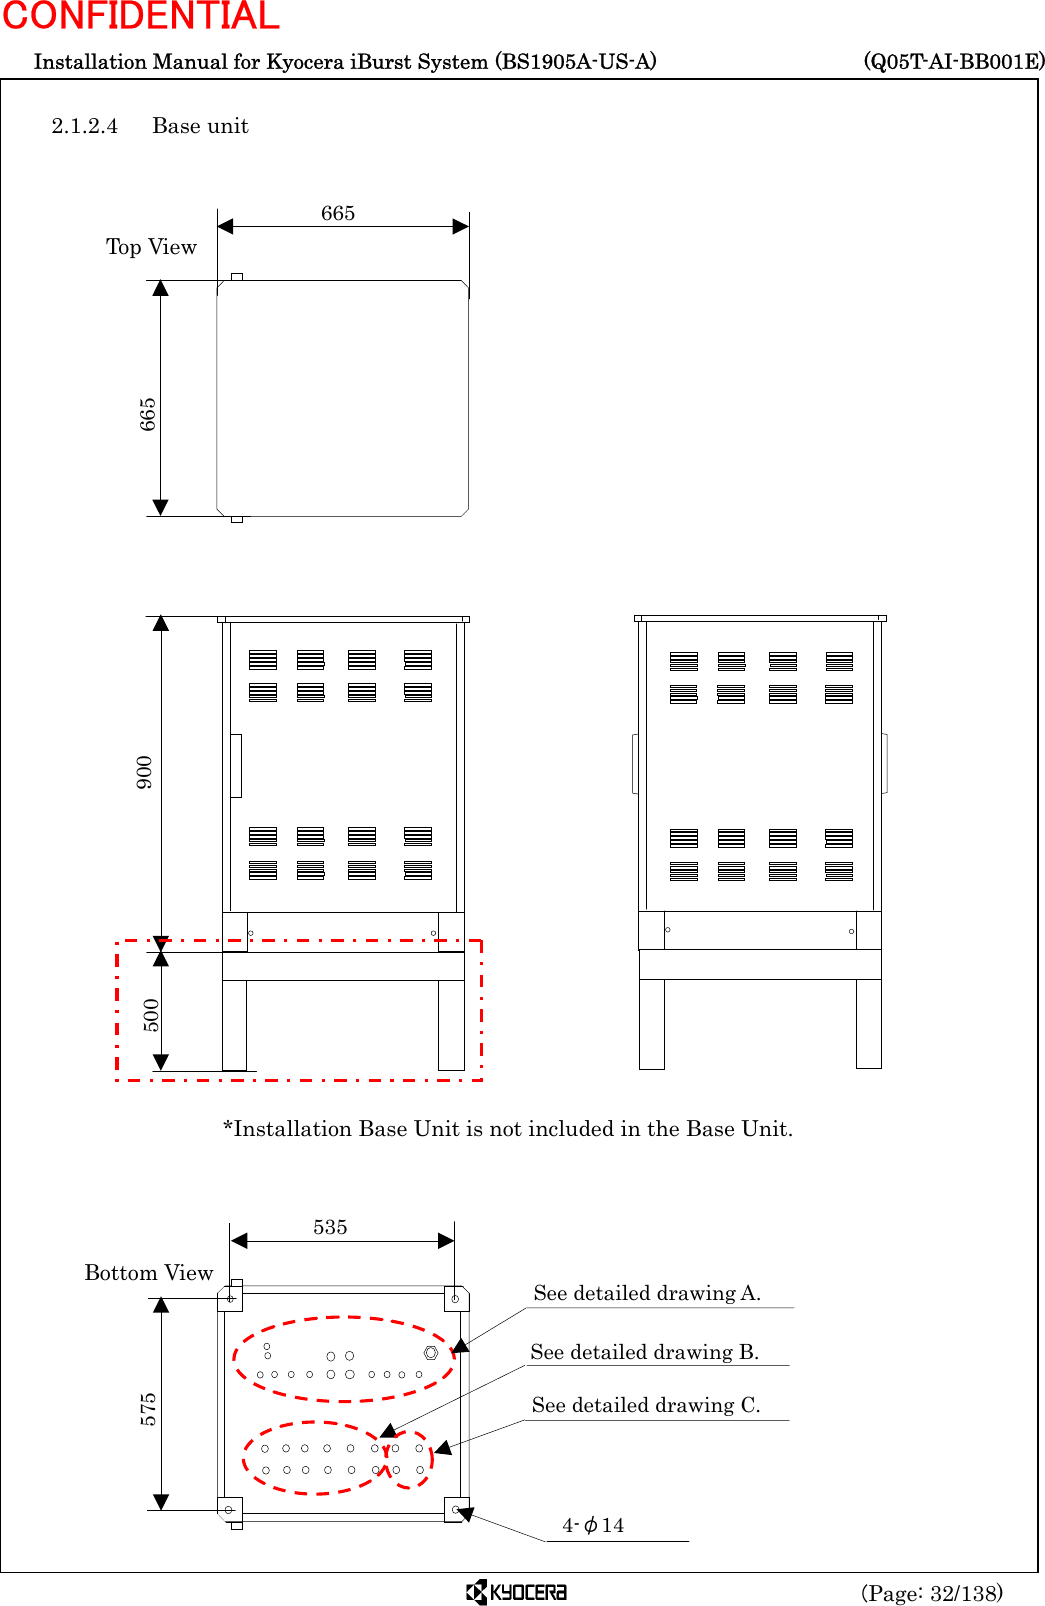  Installation Manual for Kyocera iBurst System (BS1905A-US-A)     (Q05T-AI-BB001E) (Page: 32/138) CONFIDENTIAL  2.1.2.4 Base unit                                                       535 575 See detailed drawing A. 4-φ14 See detailed drawing B. See detailed drawing C. Bottom View *Installation Base Unit is not included in the Base Unit. 665 665 Top View 500  900 